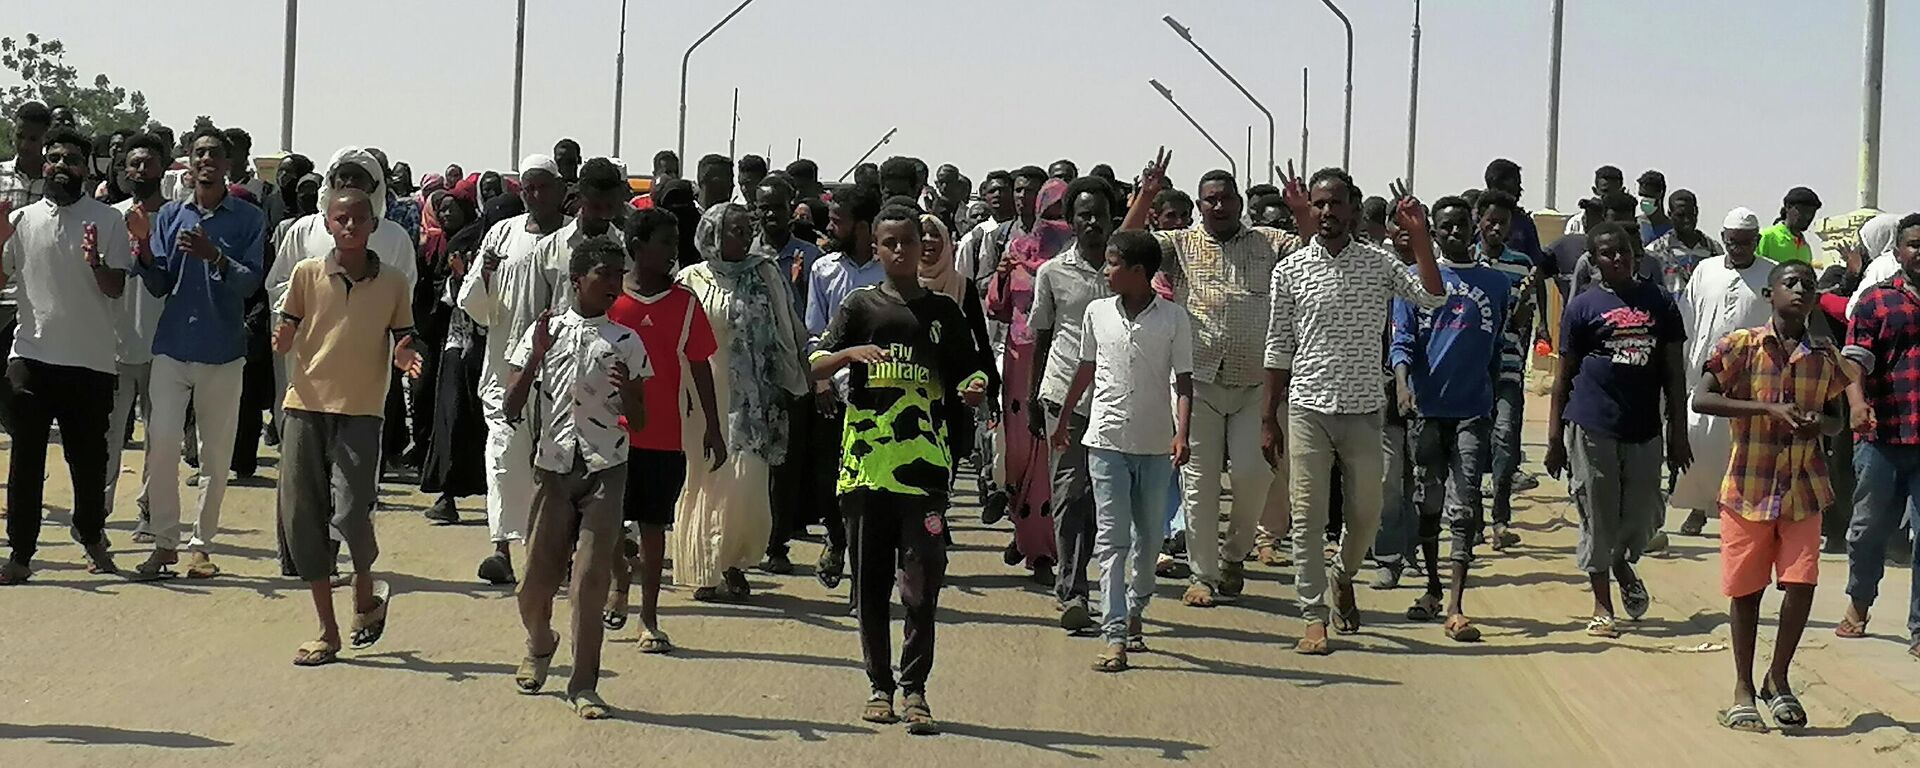 Sudanese demonstrators march and chant during a protest against the military takeover, in Atbara, Sudan October 27, 2021 in this social media image. - Sputnik International, 1920, 28.10.2021